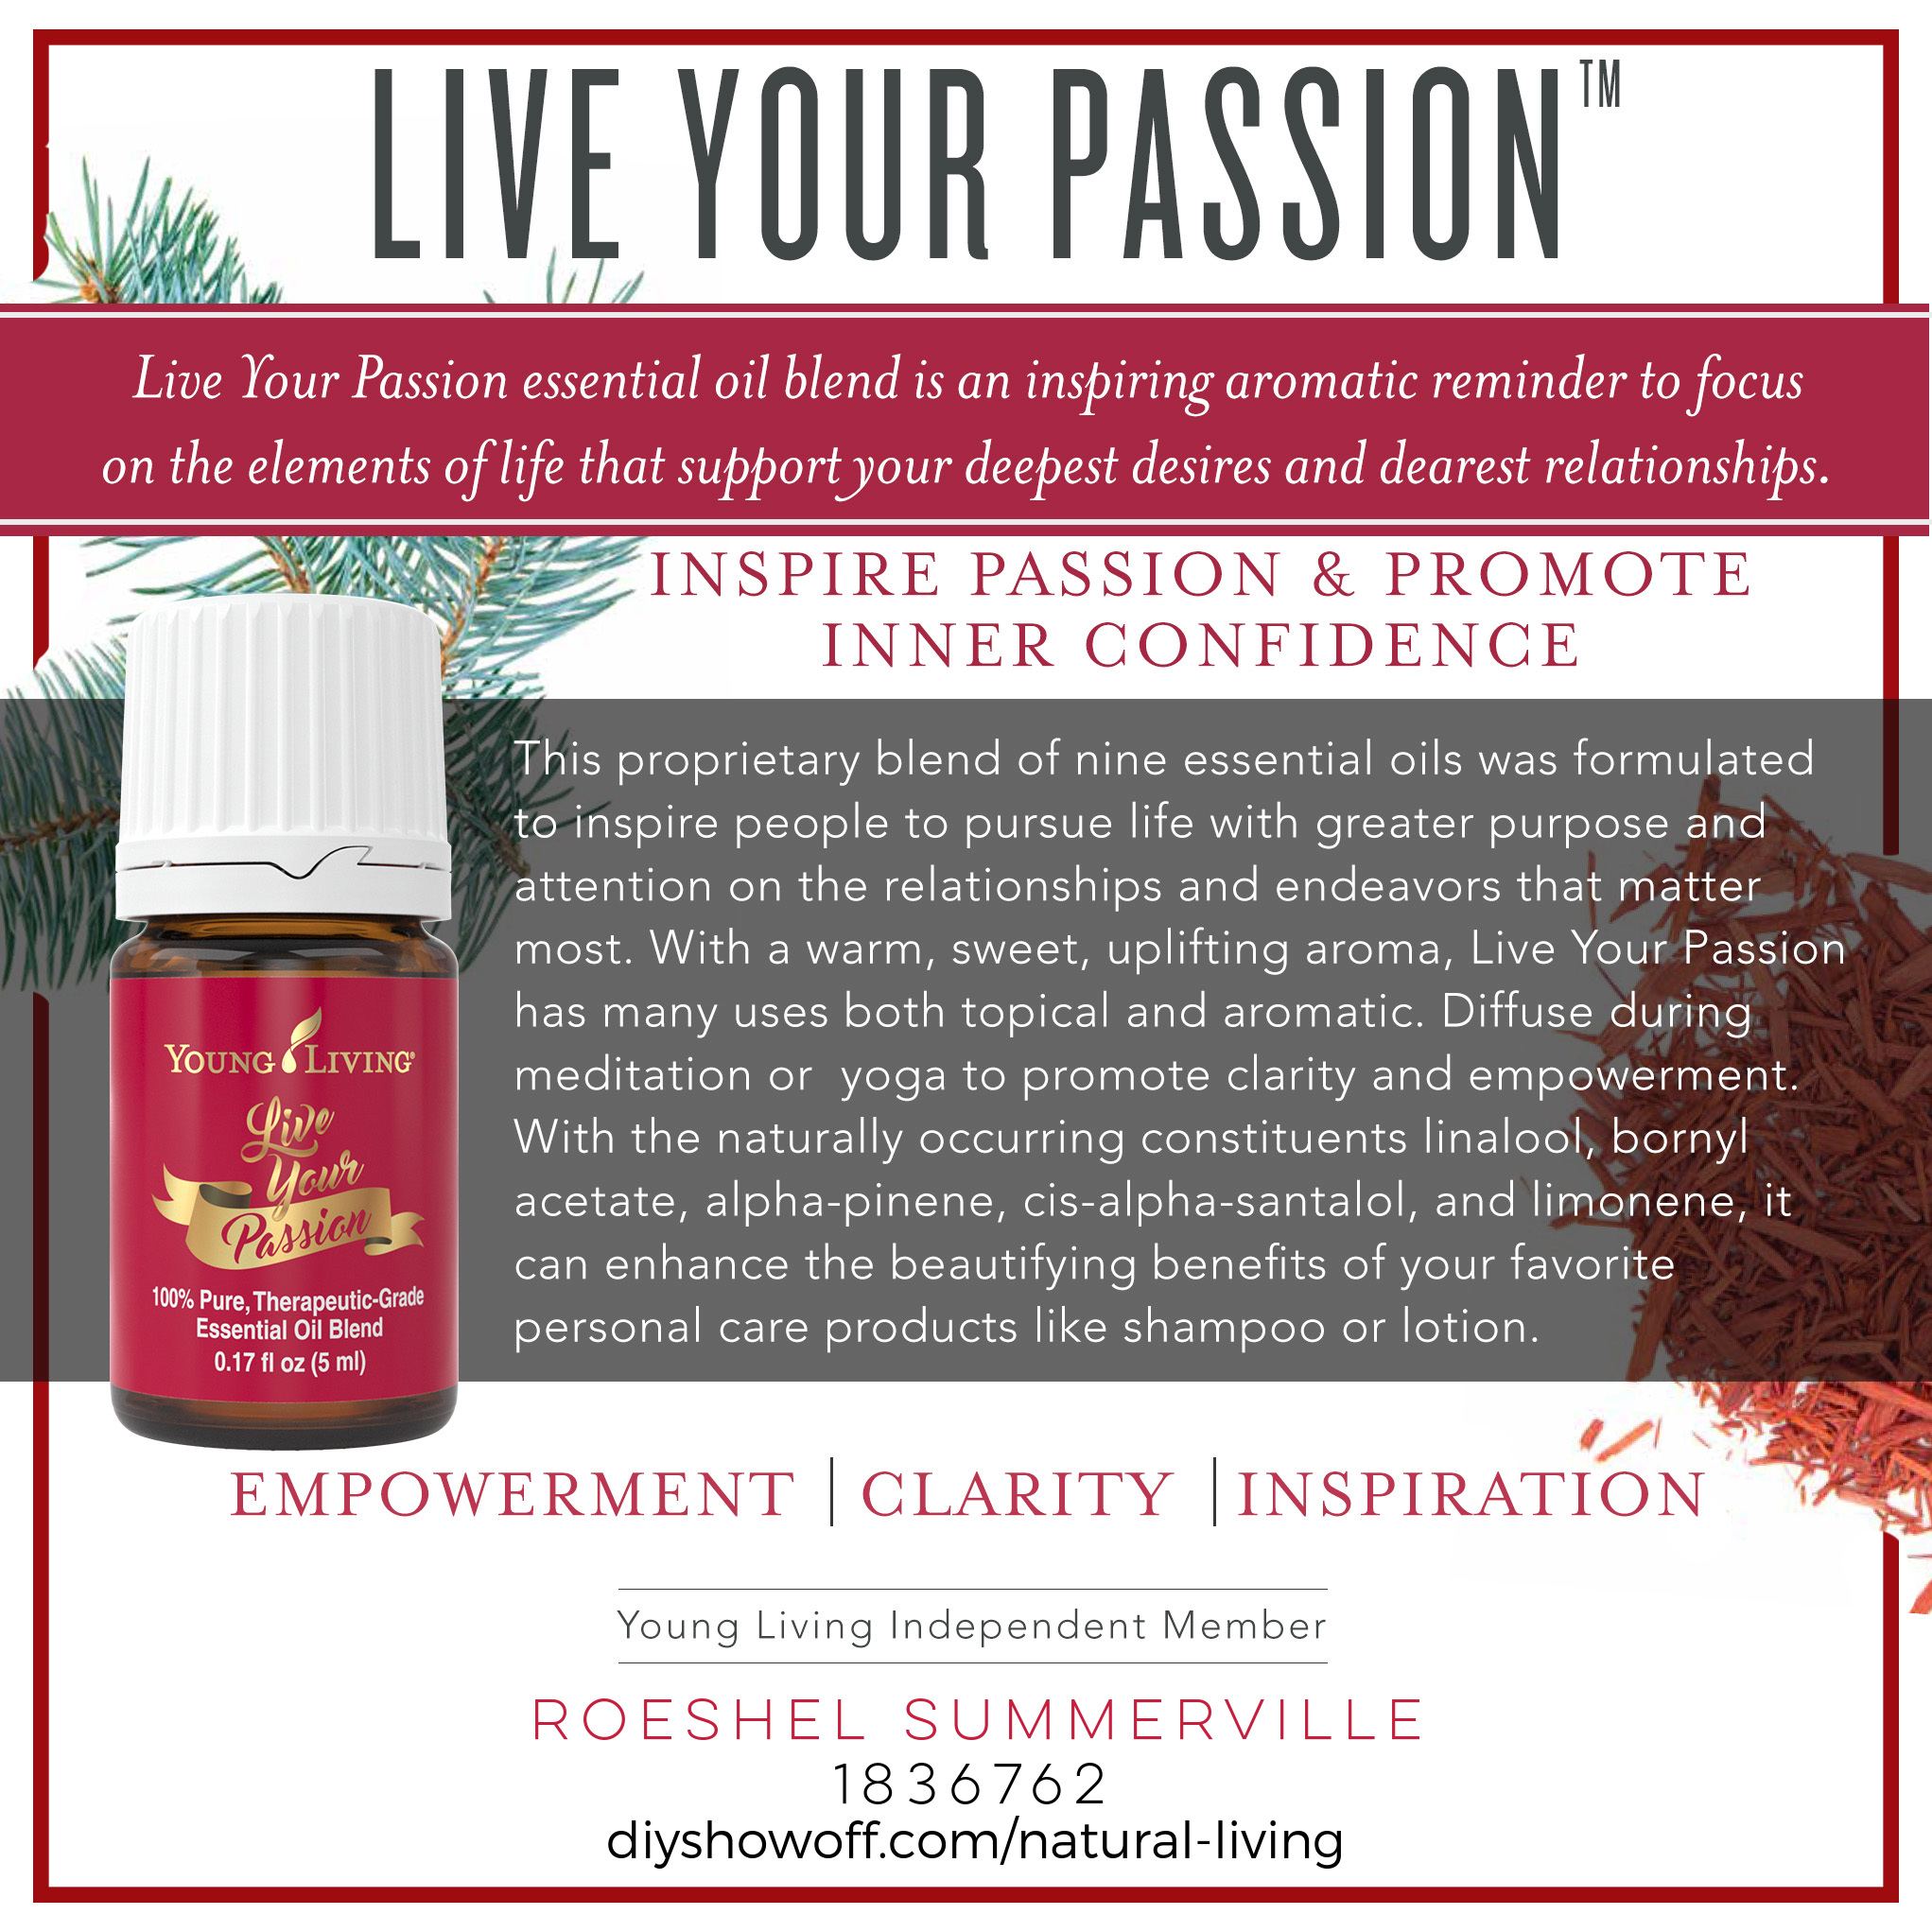 Young Living 2016 product reveal @diyshowoff